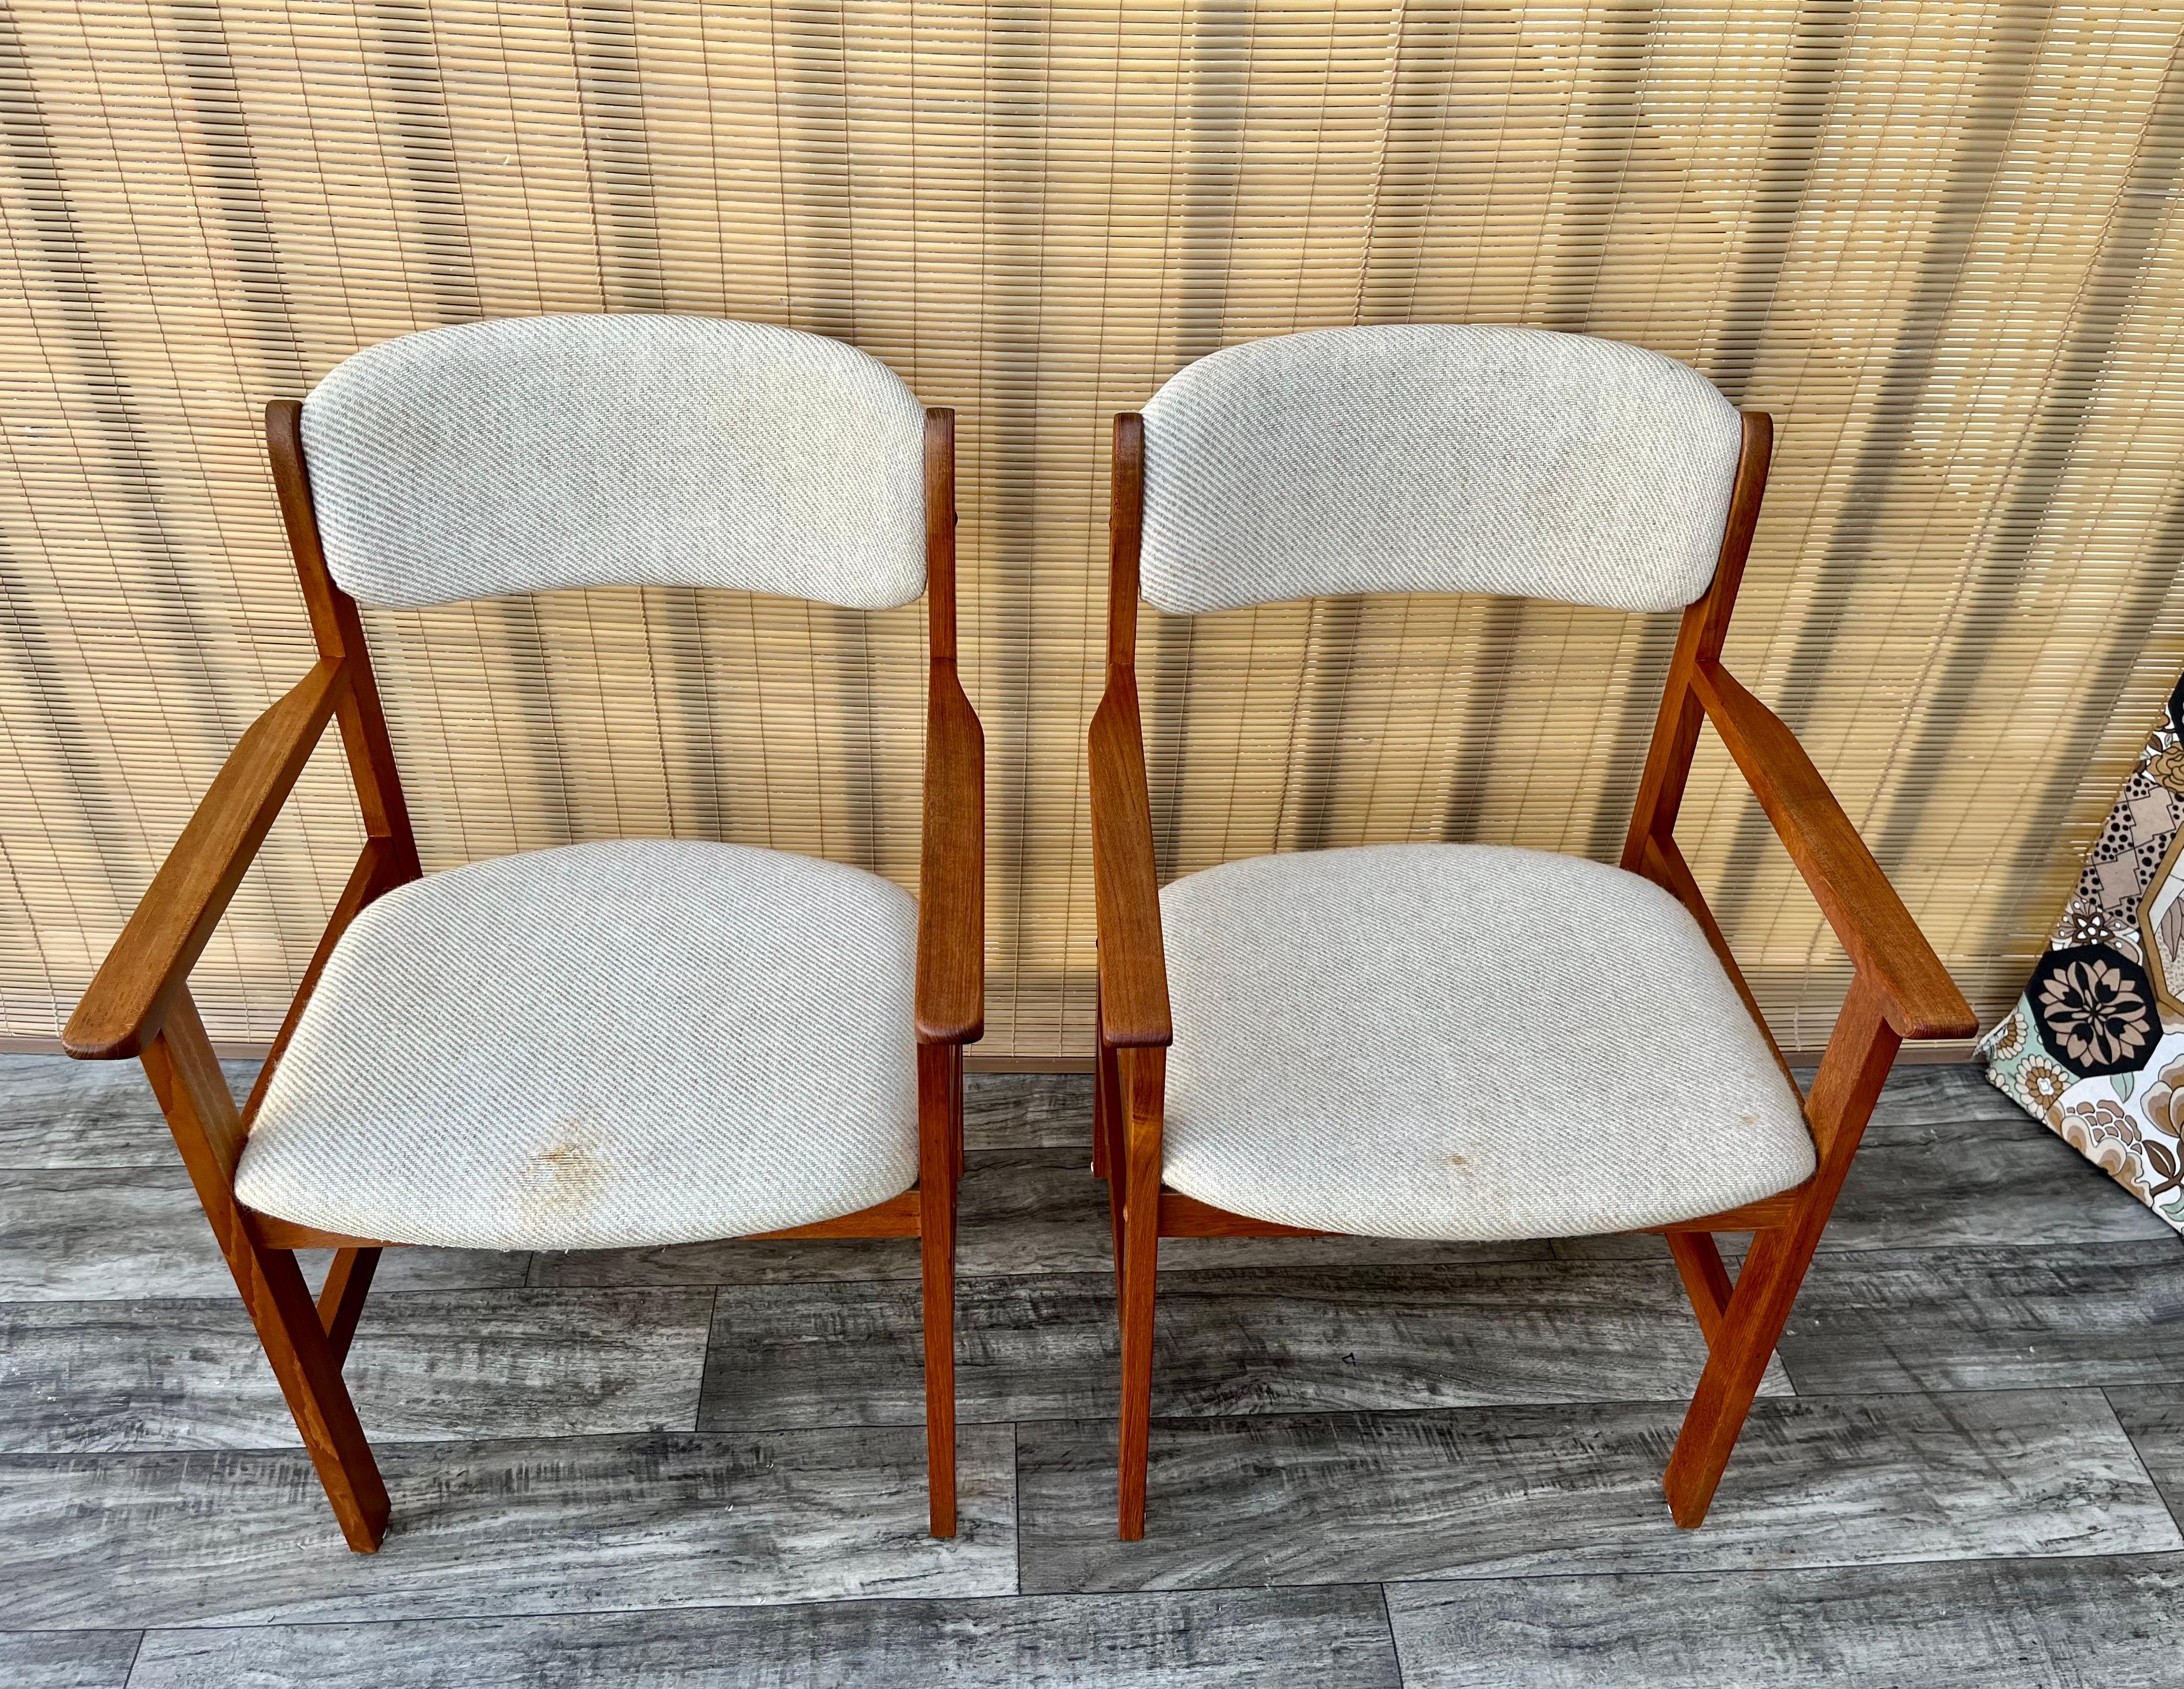 Thai 1980s Mid-Century Danish Modern Style Captain Chairs by Benny Linden Design. For Sale